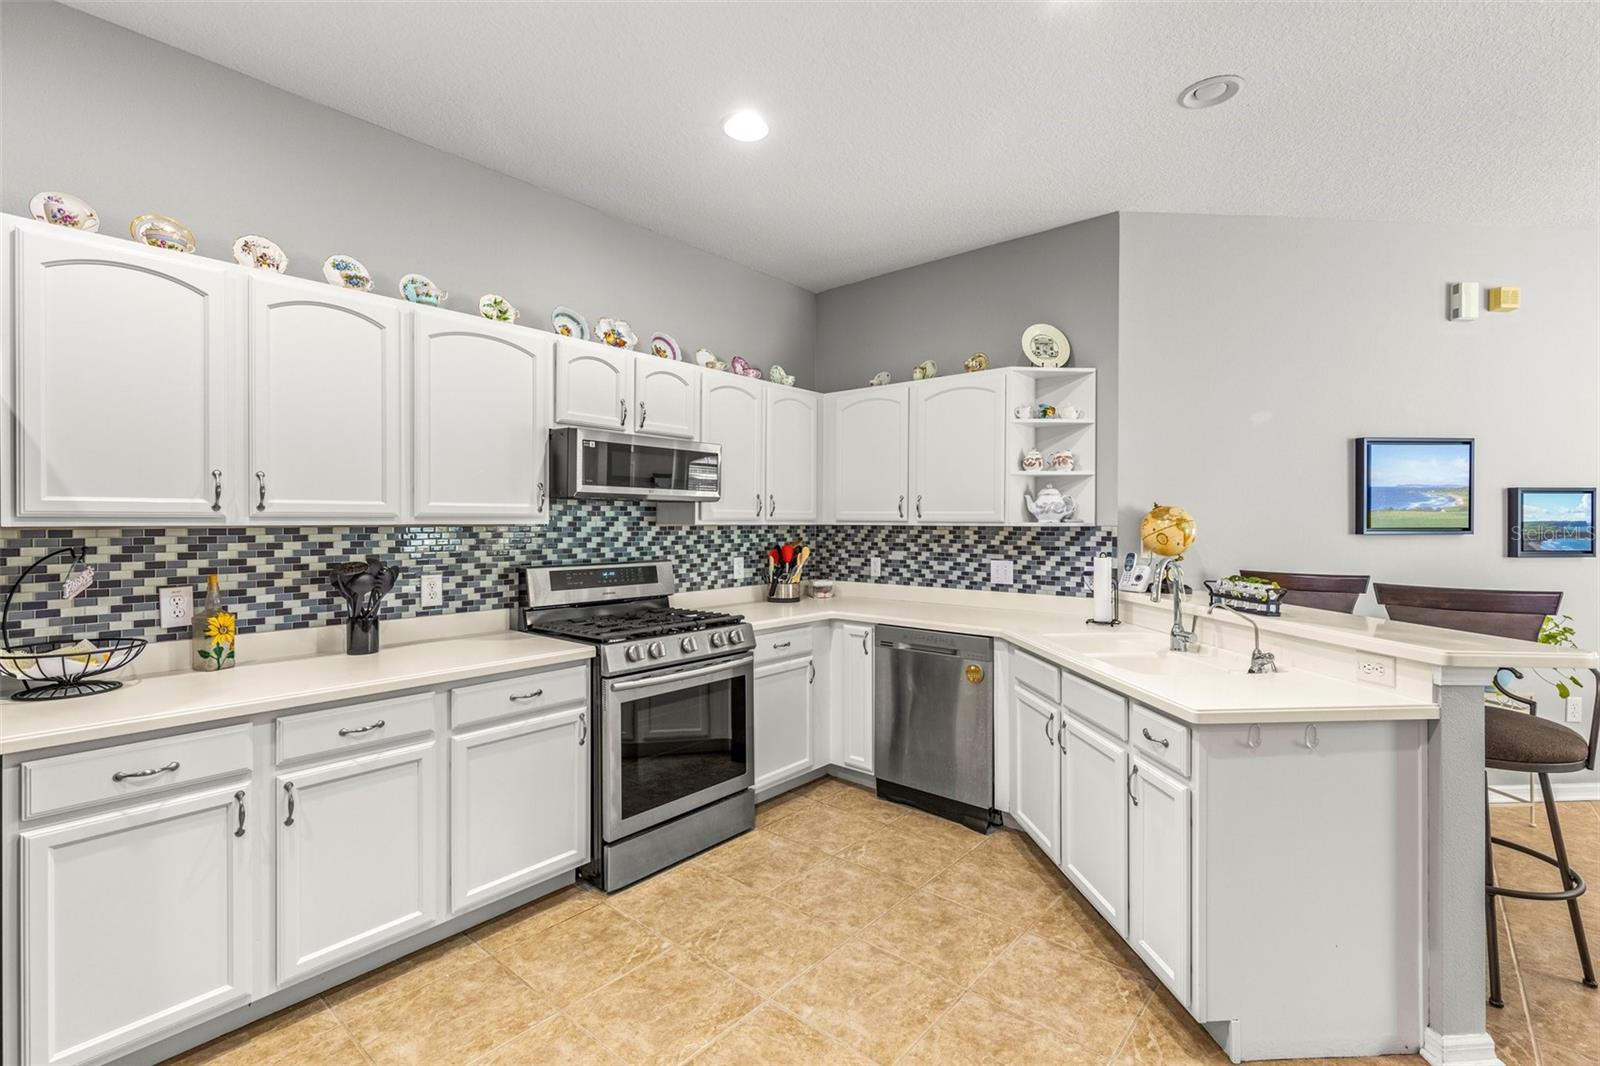 Kitchen has large Entertaining or Cooking Space!  Plenty of Storage and Counters!